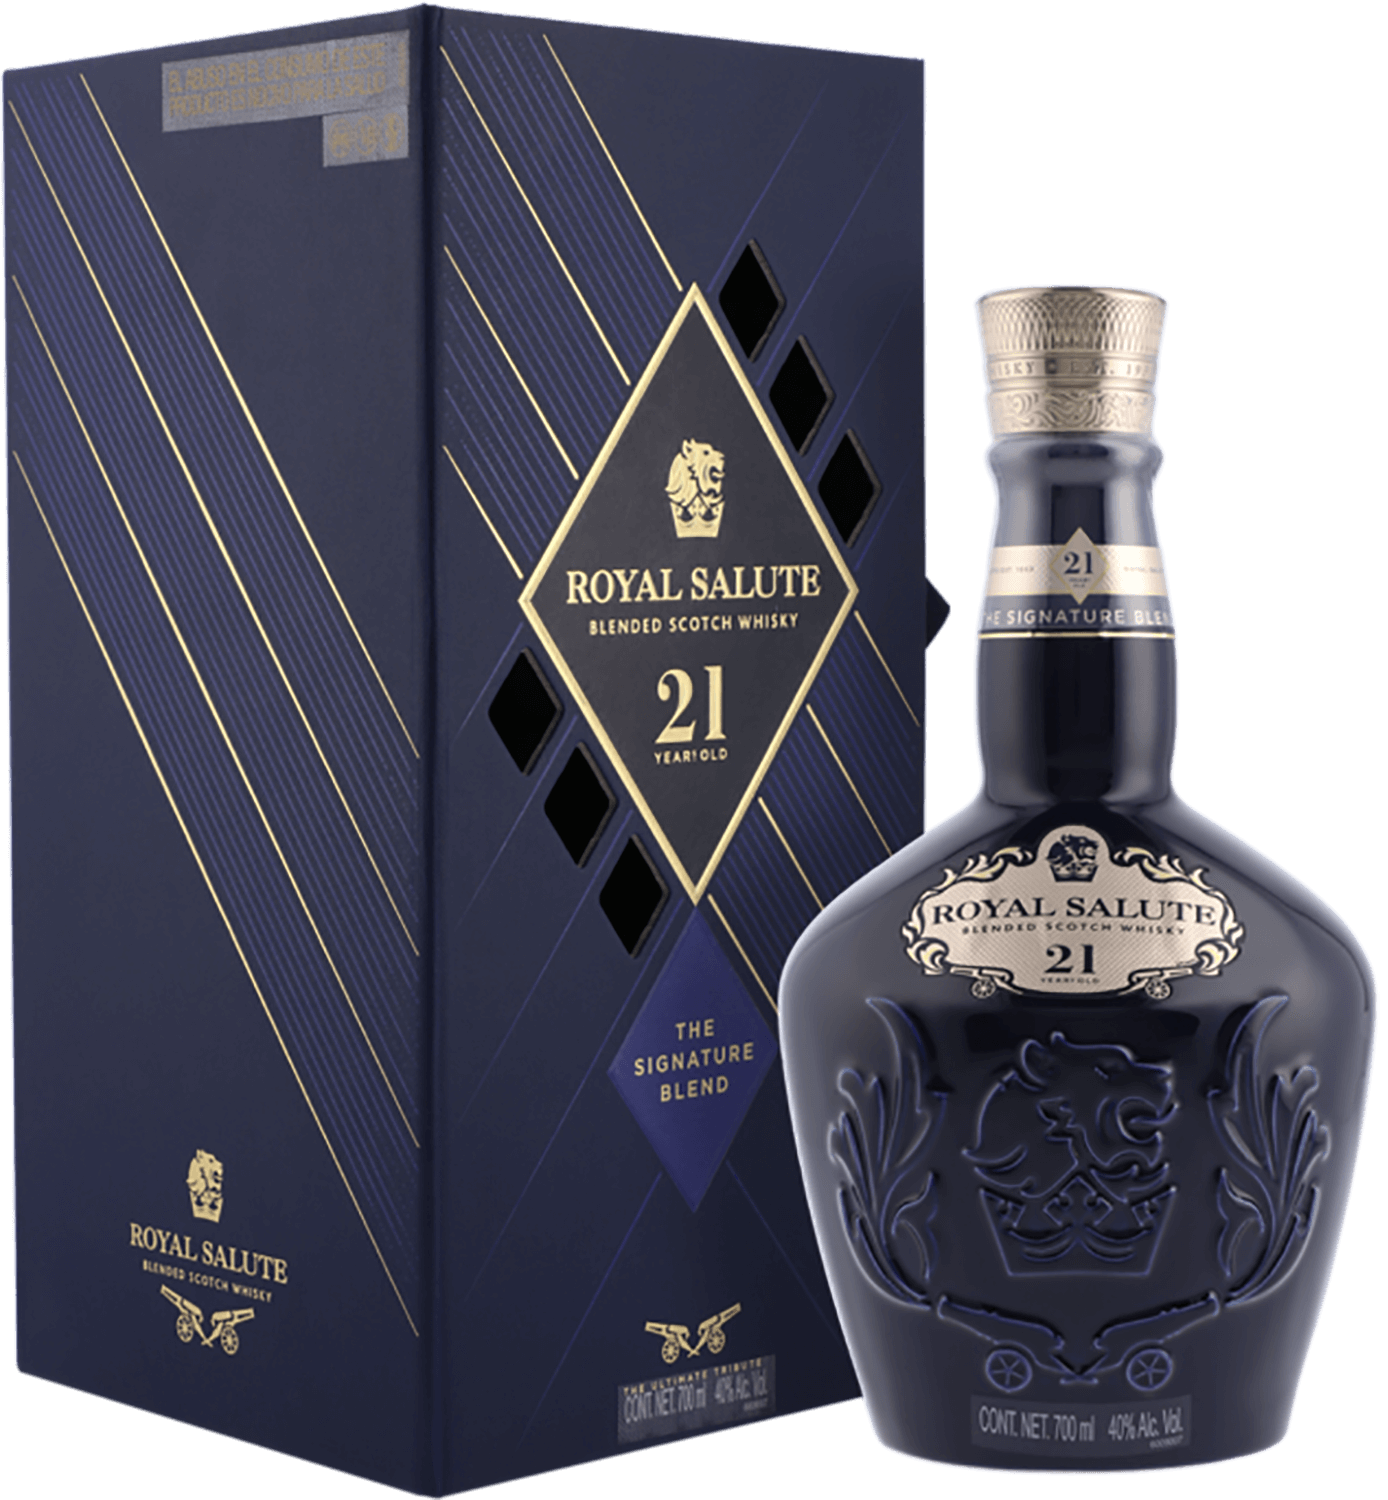 Chivas Regal Royal Salute 21 y.o. blended scotch whisky (gift box)